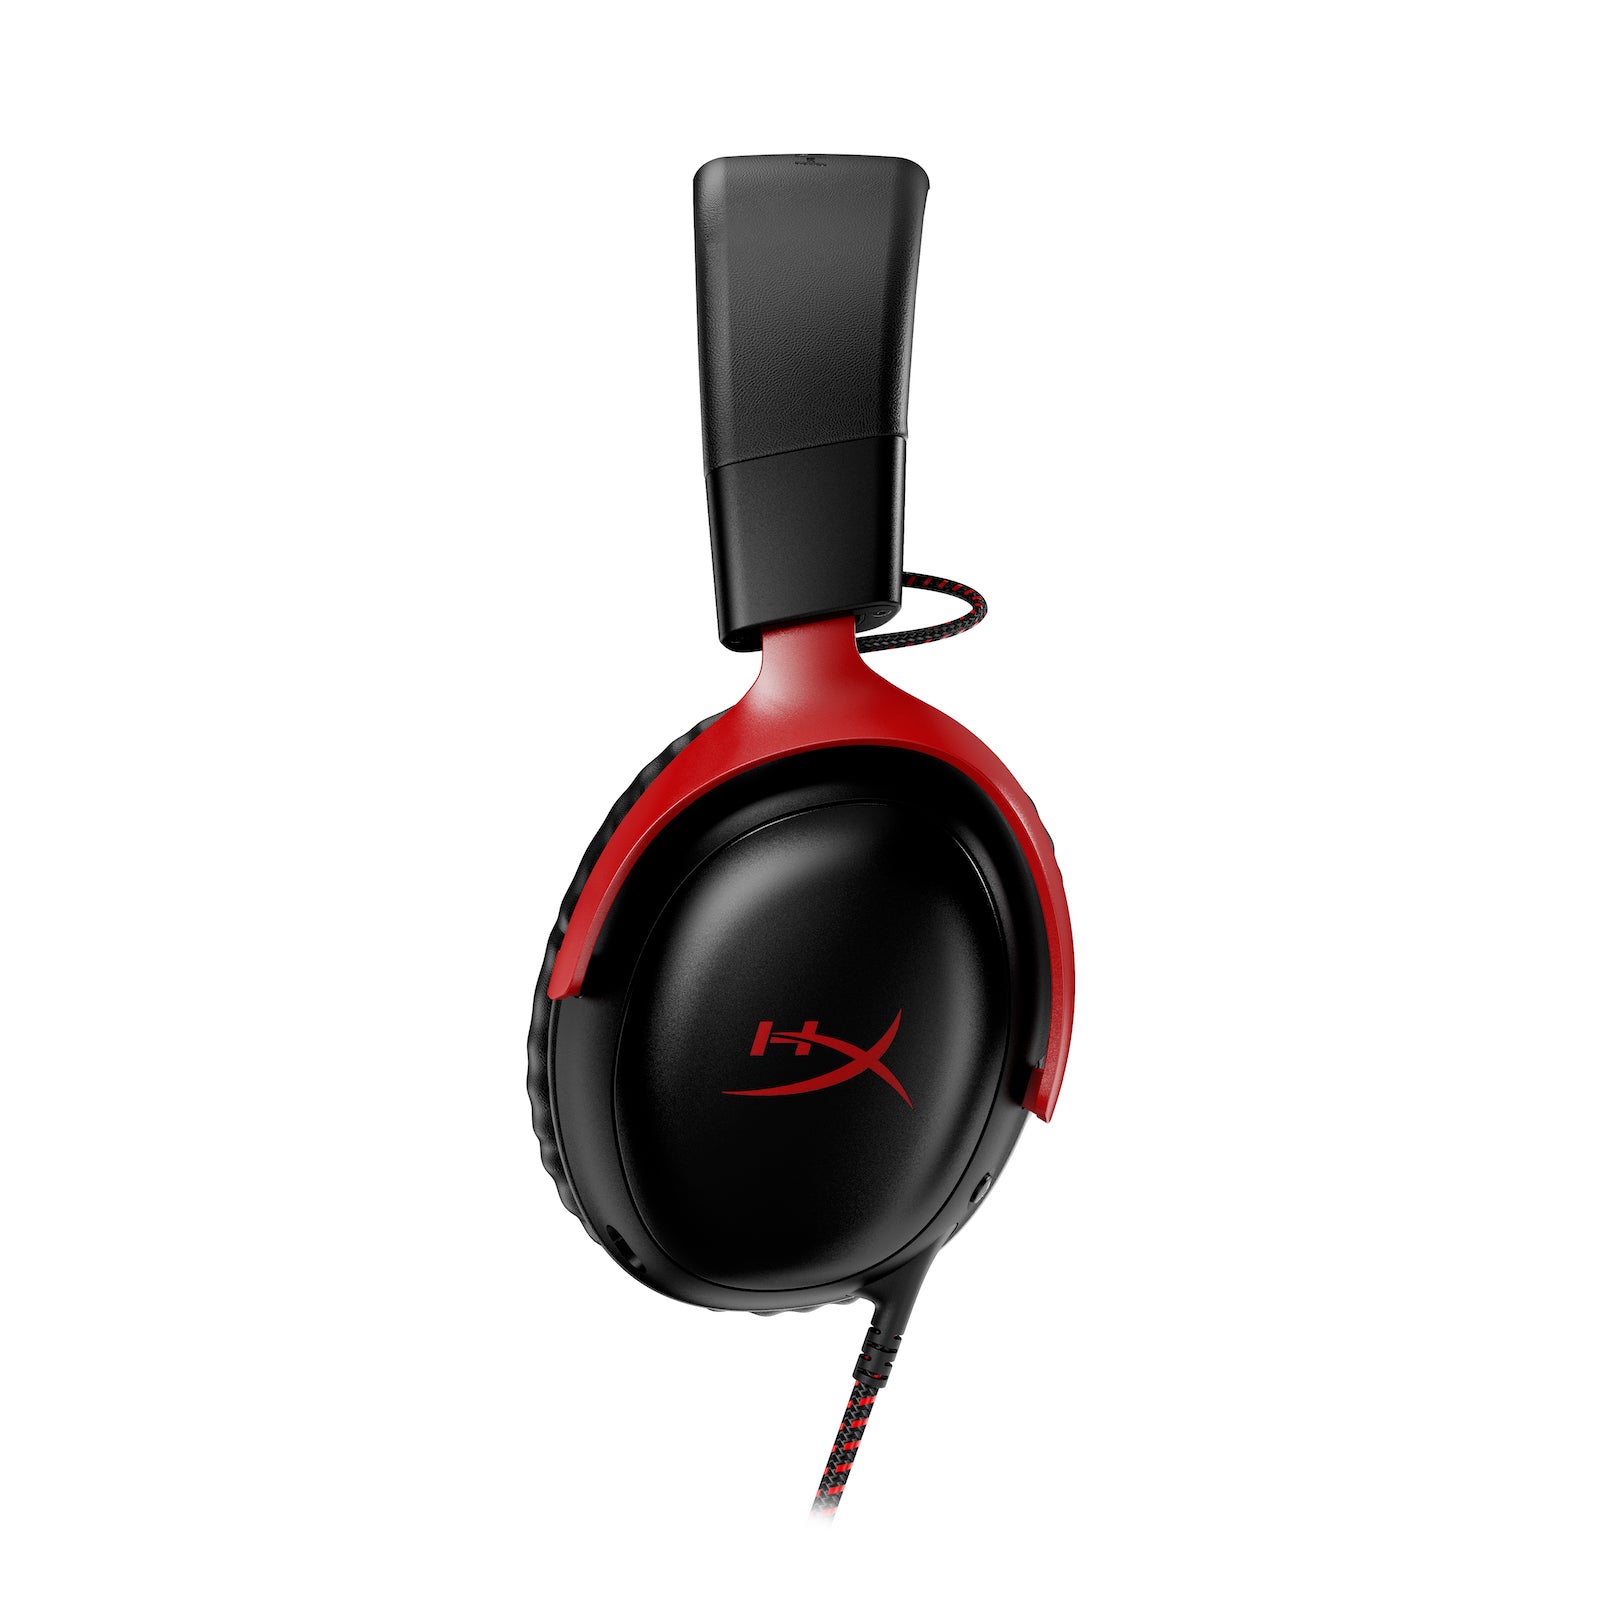 Kingston HyperX Cloud Silver Gaming Headset with Mic